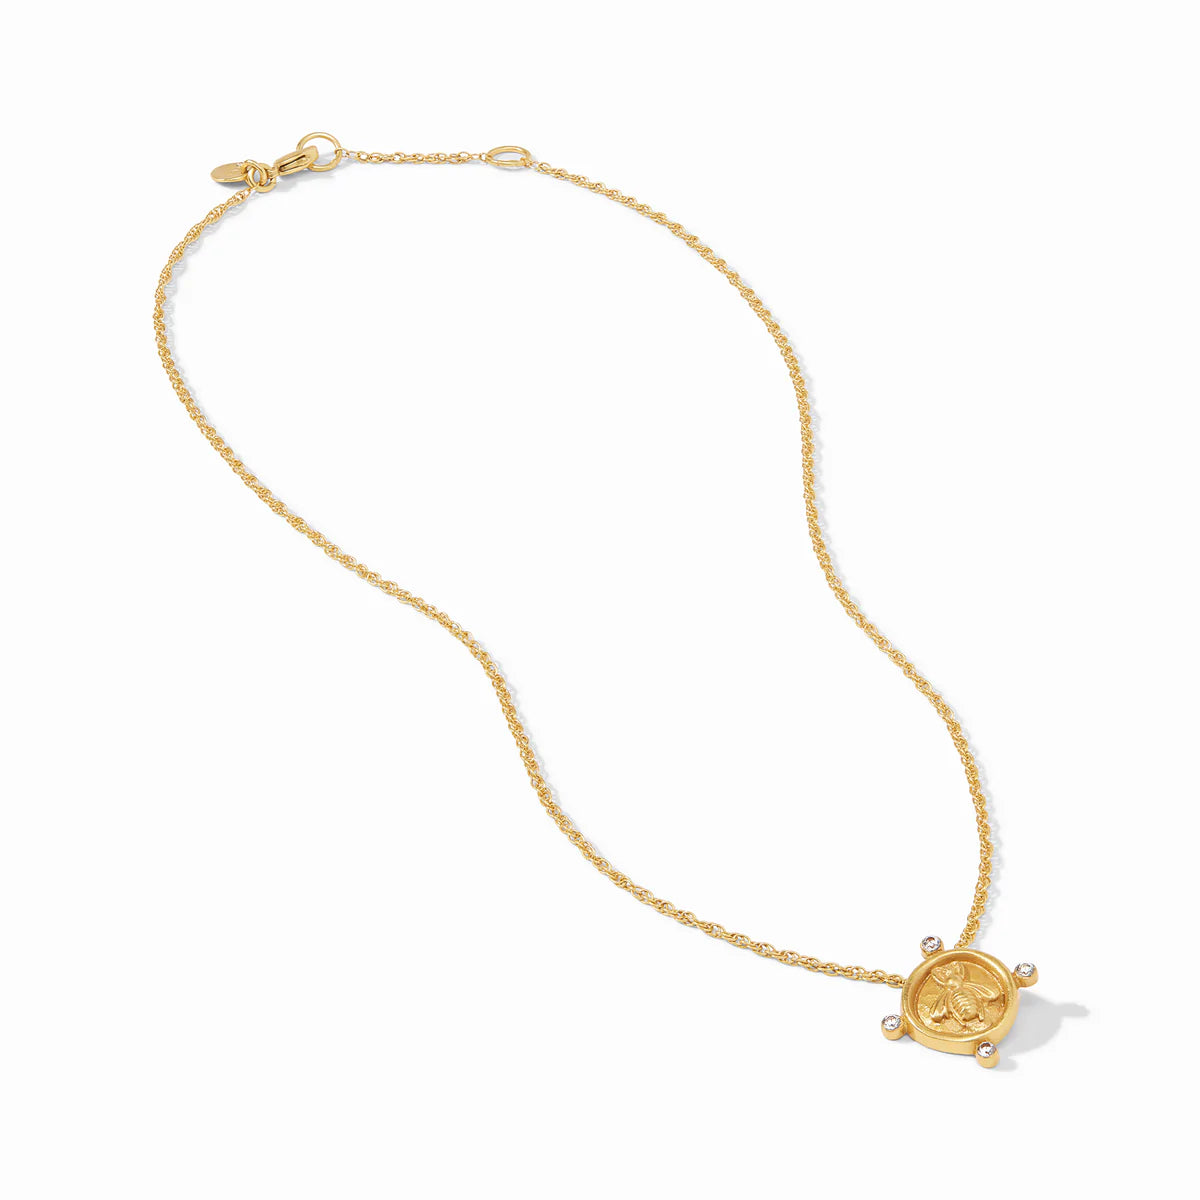 Bee Cameo Solitaire Necklace features our signature bee as a molded cameo surrounded by four tiny cubic zirconia. 16.5-17.5 inches 24K gold plate. Shop at The Painted Cottage in Edgewater, MD.